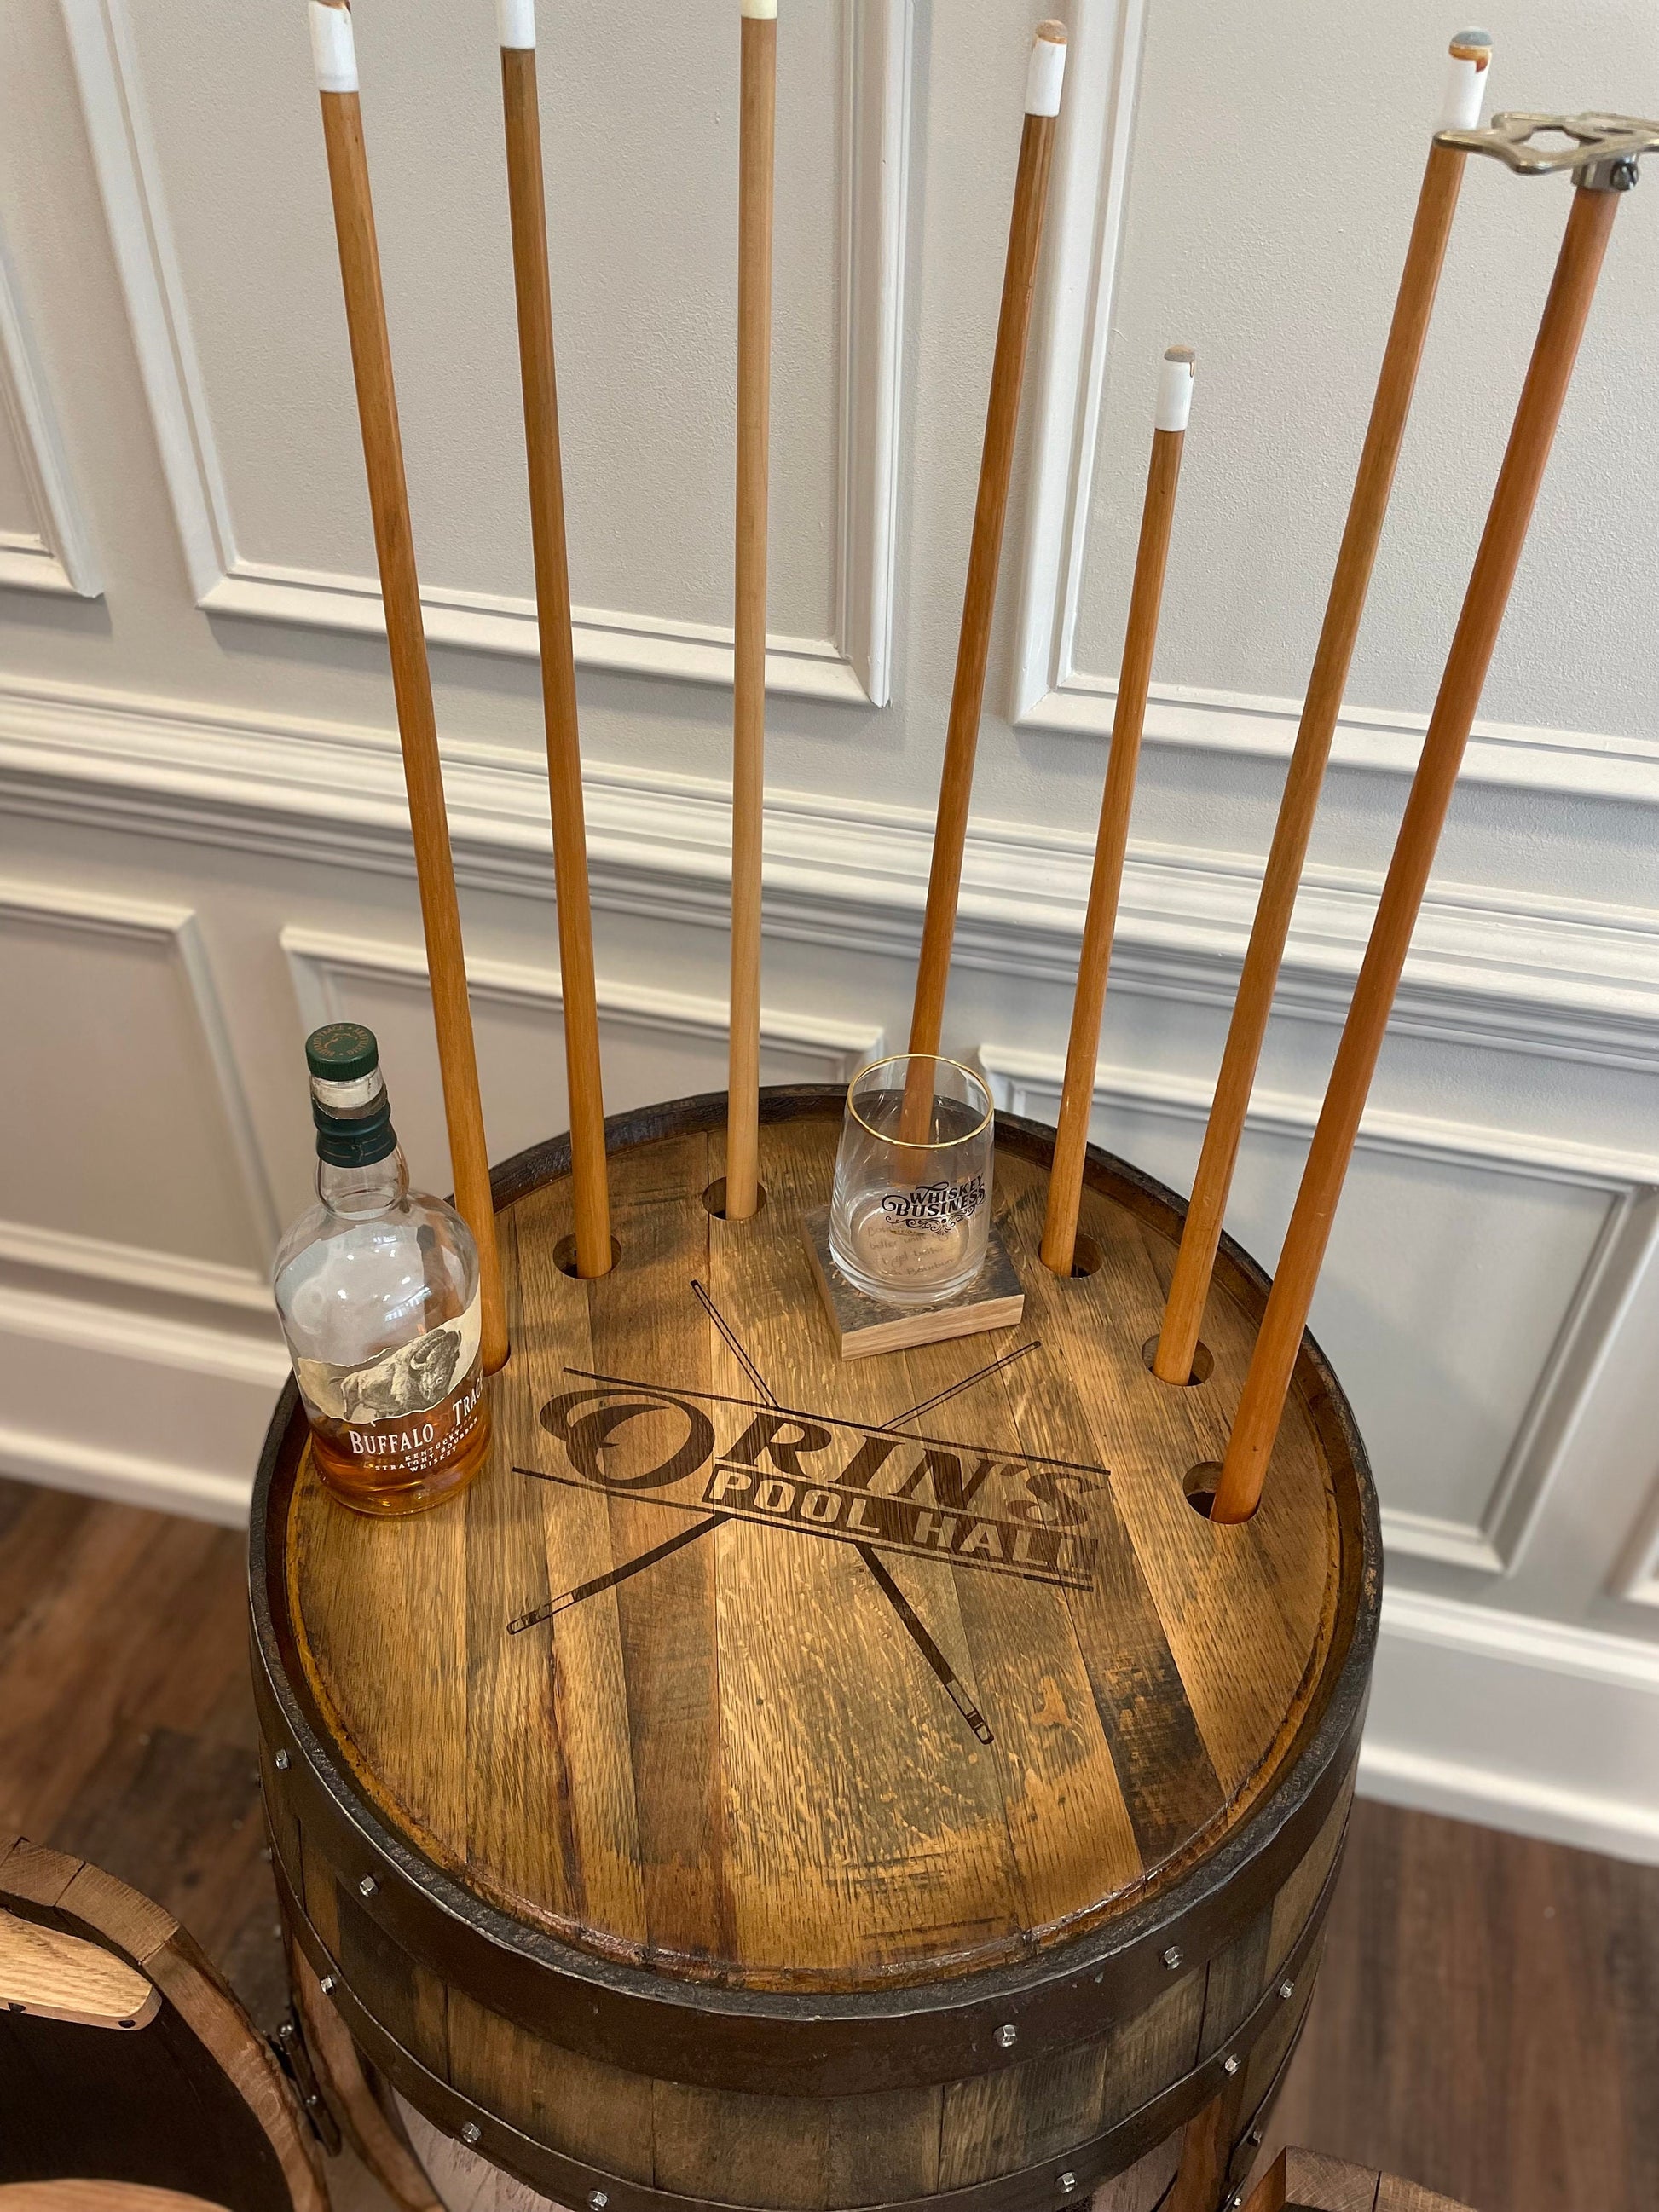 Custom Products made from Whiskey Barrel